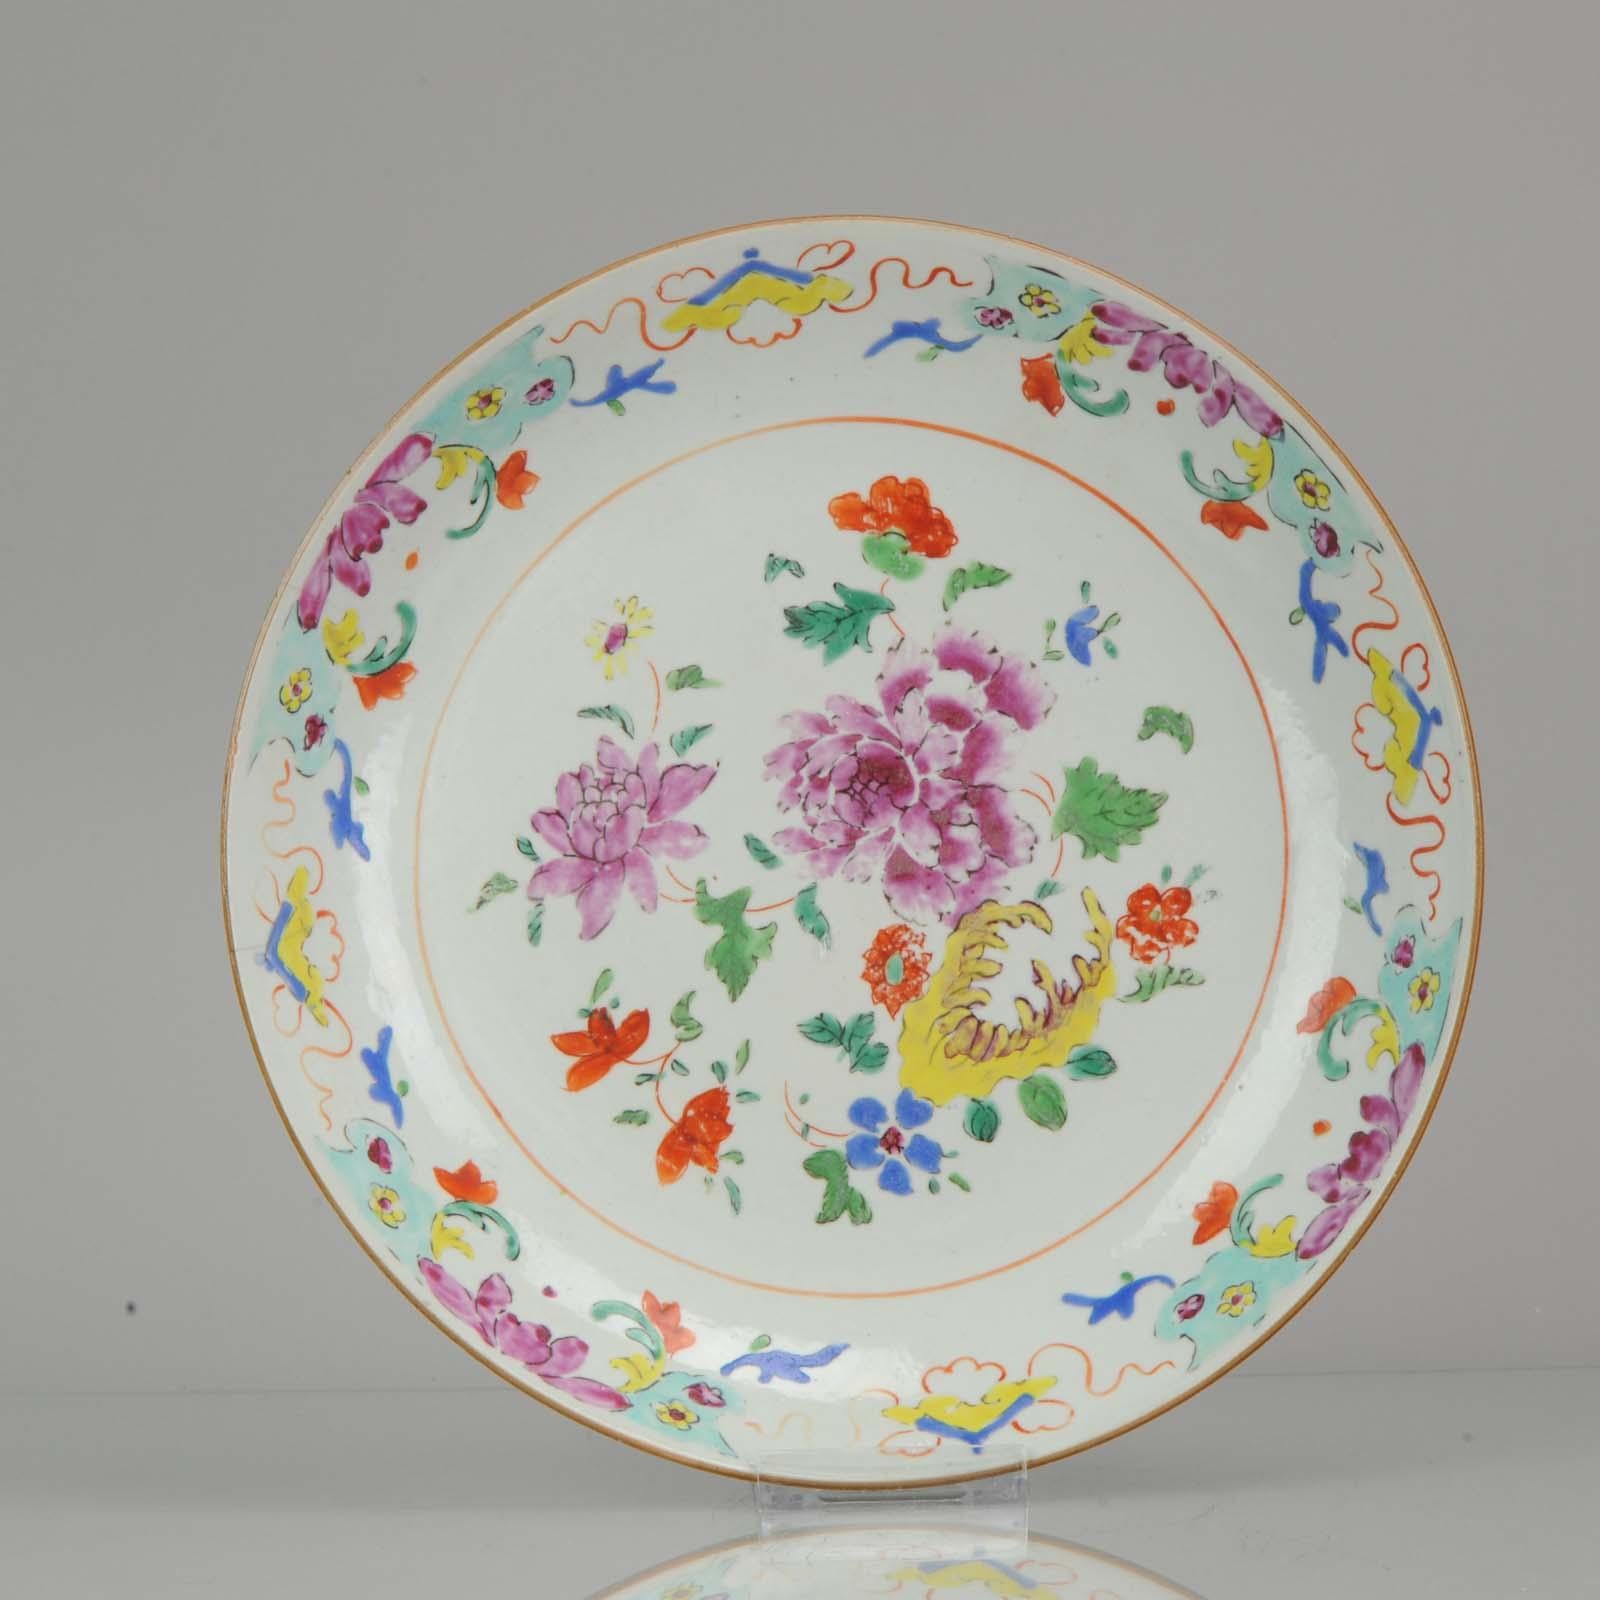 Lovely Chinese Porcelain Famille Rose Charger

We call this style Pre Bencharong because it has many features of later bencharong / south east Asian wares, but it is older. Often these plates are dated to Qianlong period 18th century. They are